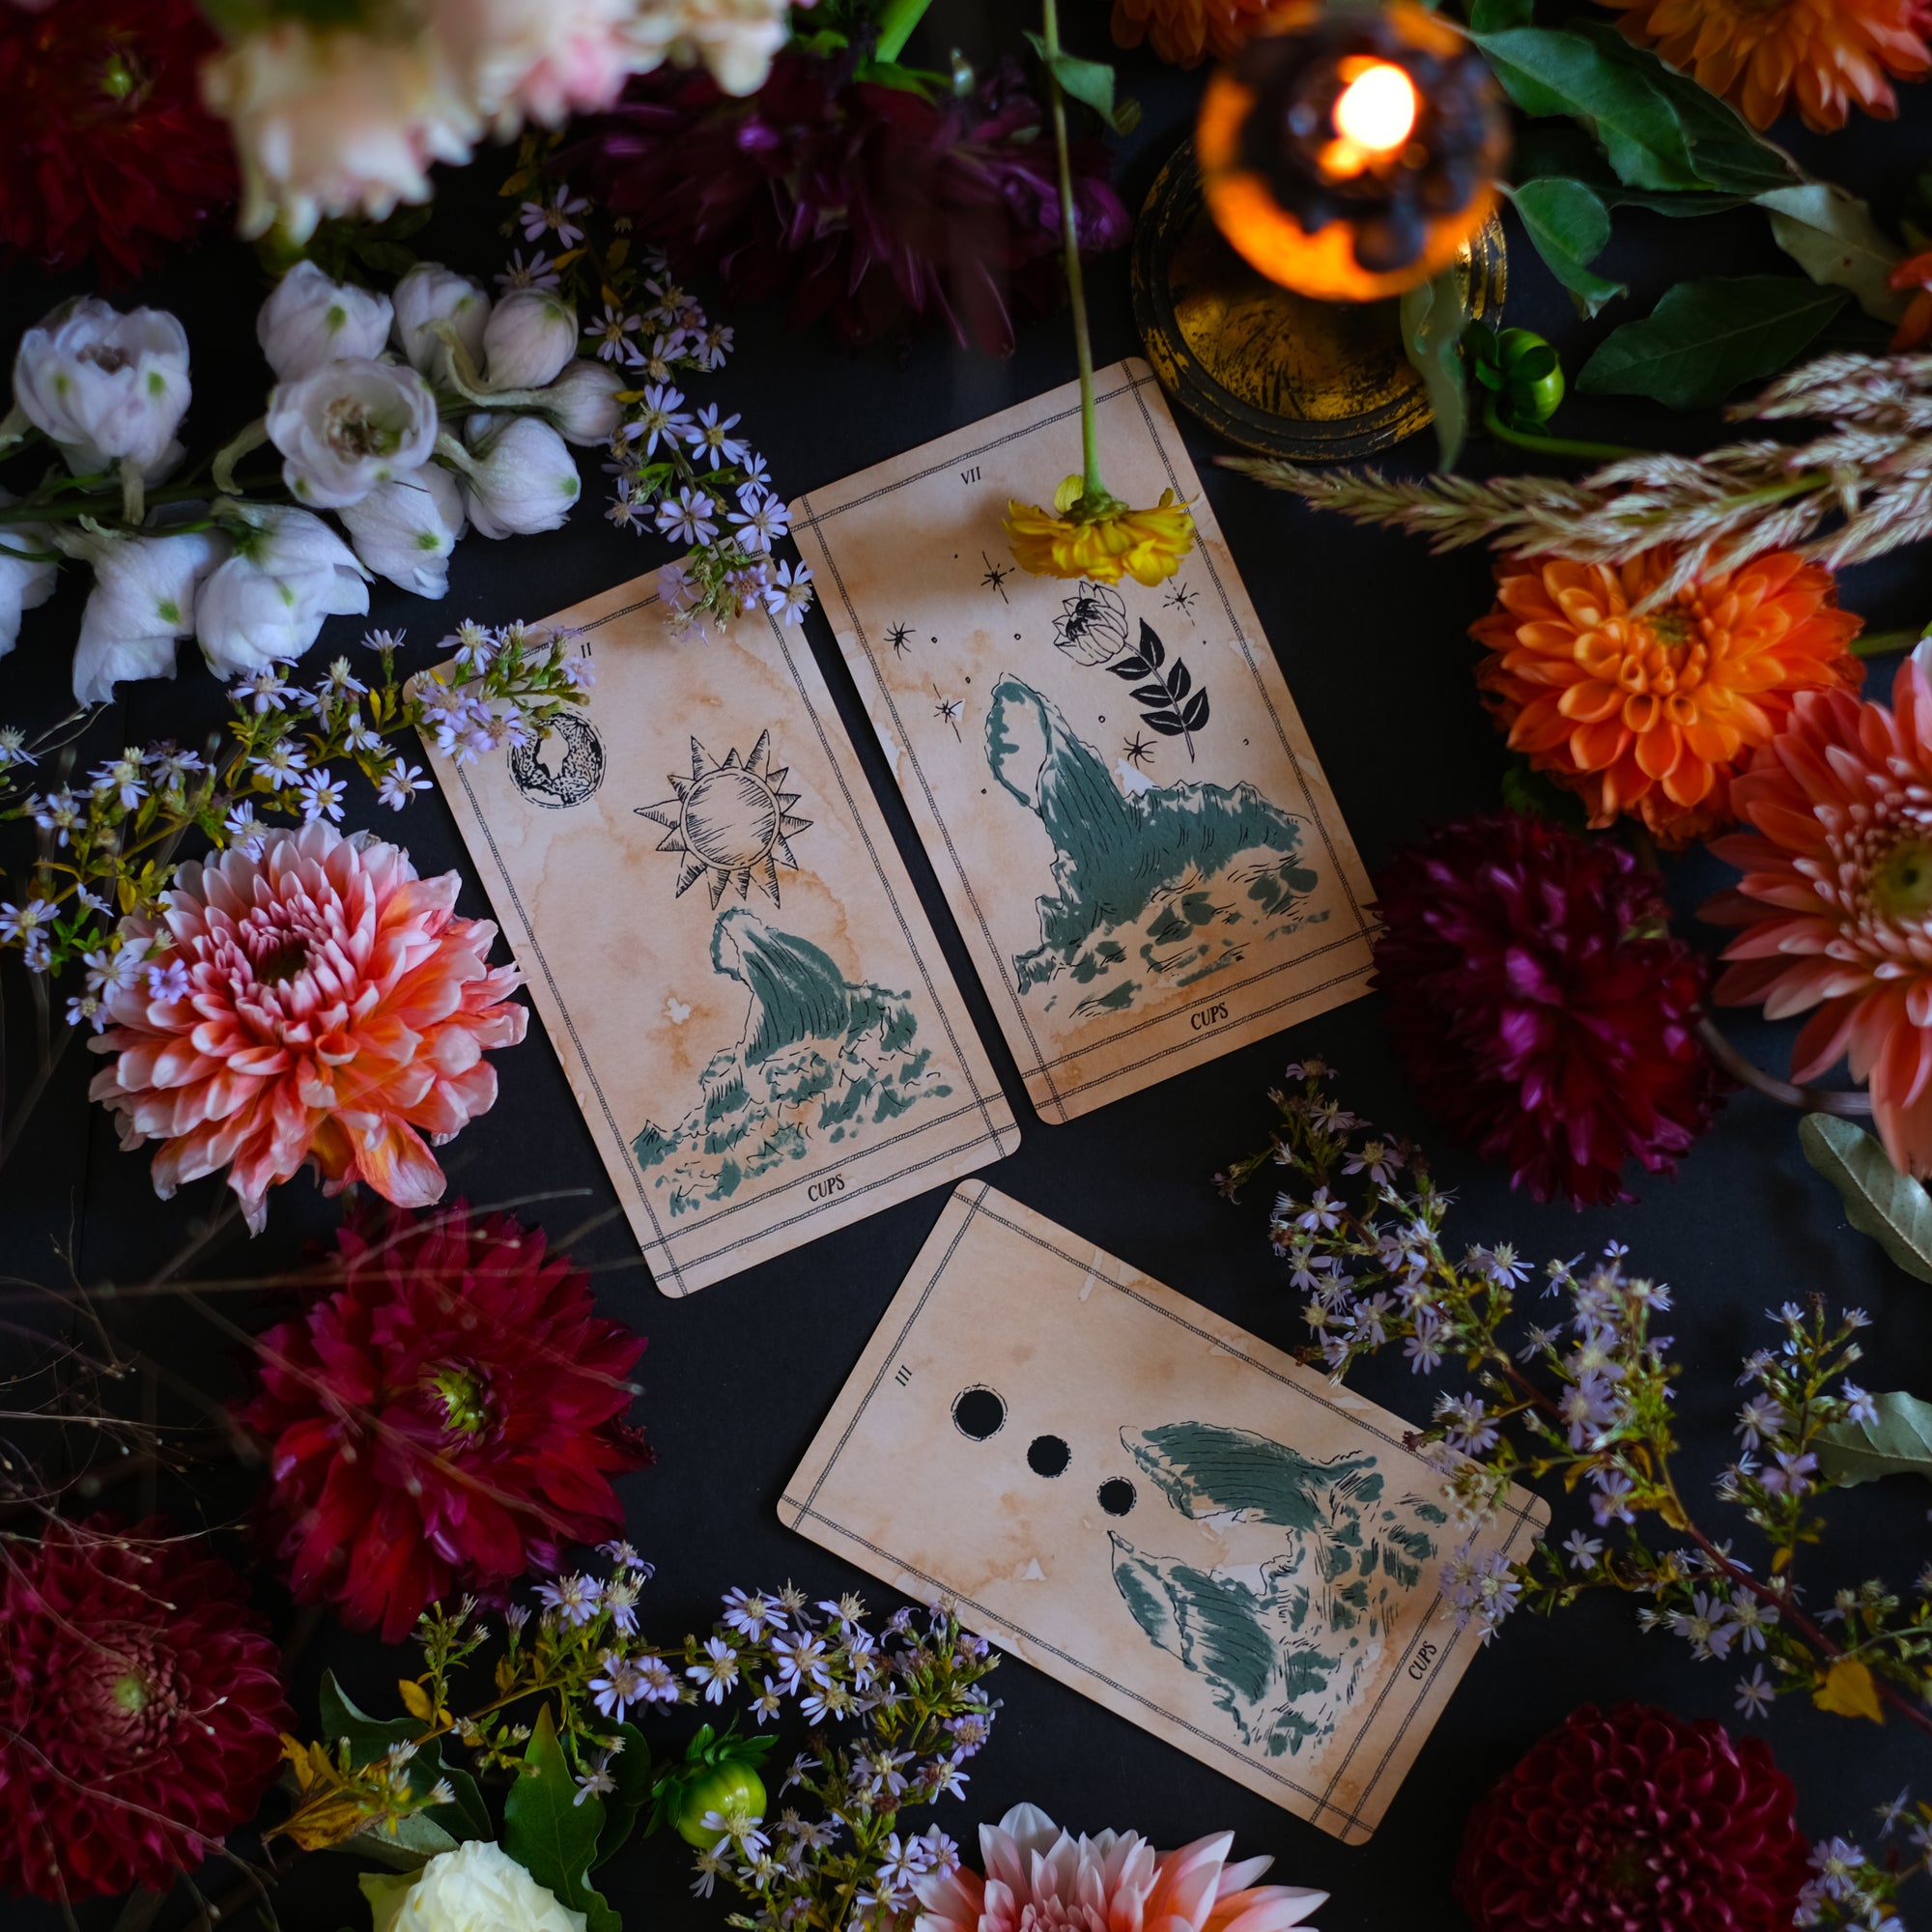 Ad Orbita Tarot is a hand-illustrated 78 card botanical and astrological deck. Rooted in the relationship between plants and the planets, each of these 78 tarot cards draws upon ancient meaning in a modern, imaginative and intuitive form.